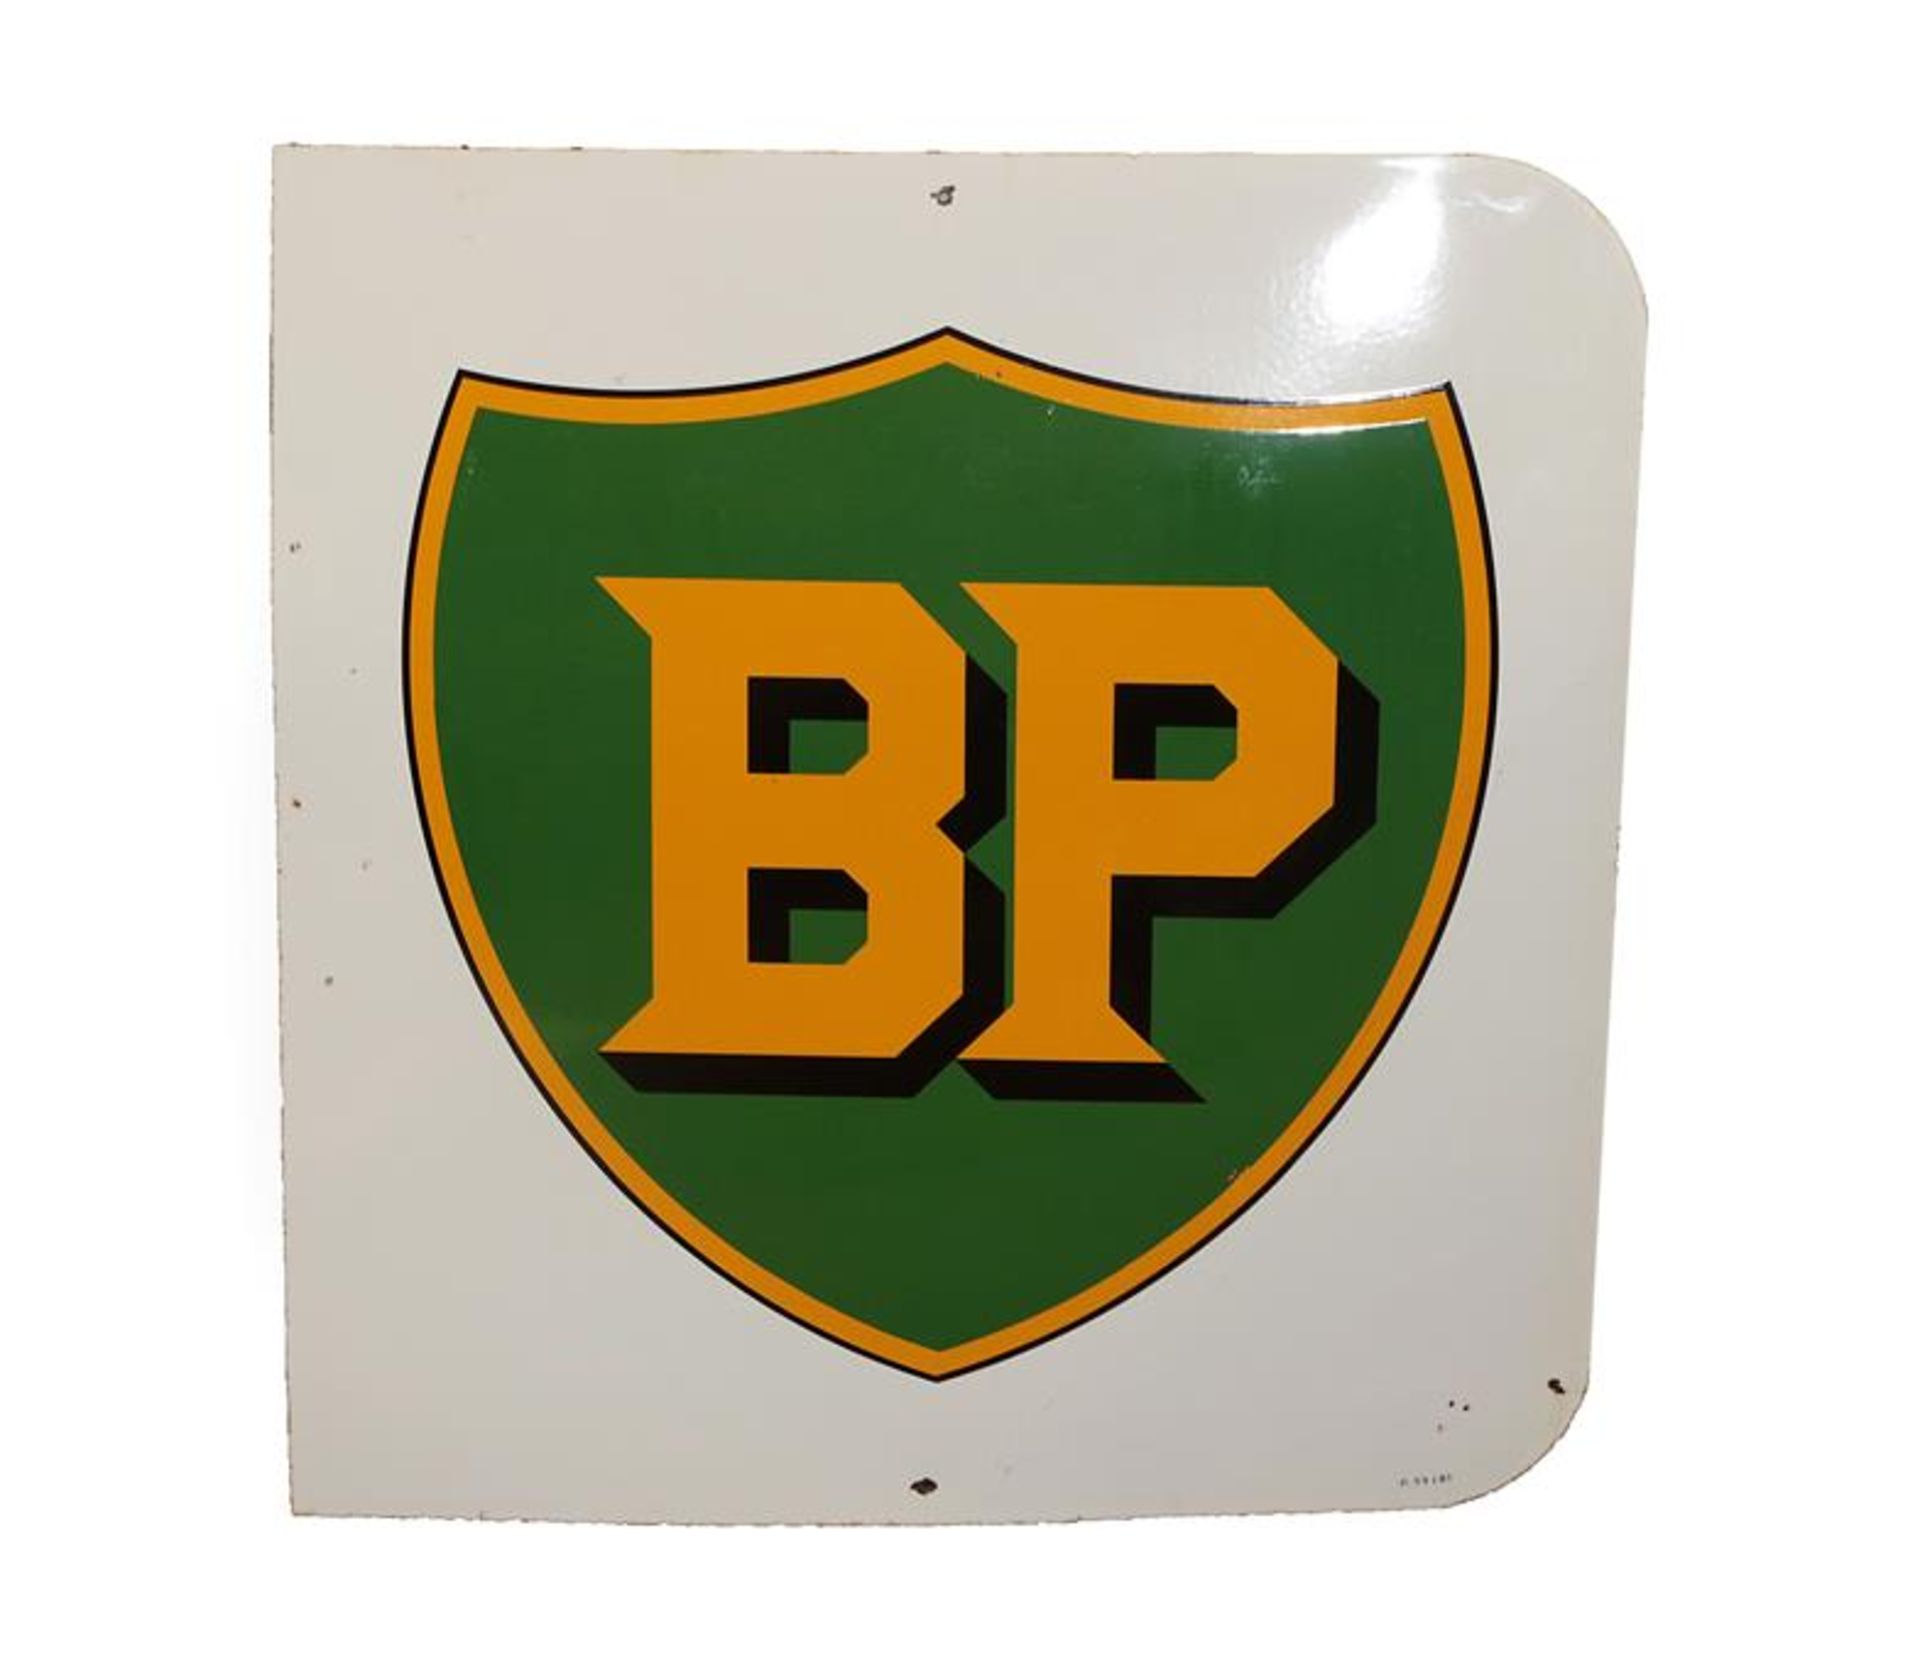 BP: A Single-Sided Enamel Advertising Sign, with yellow lettering on a green cartouche, the corner